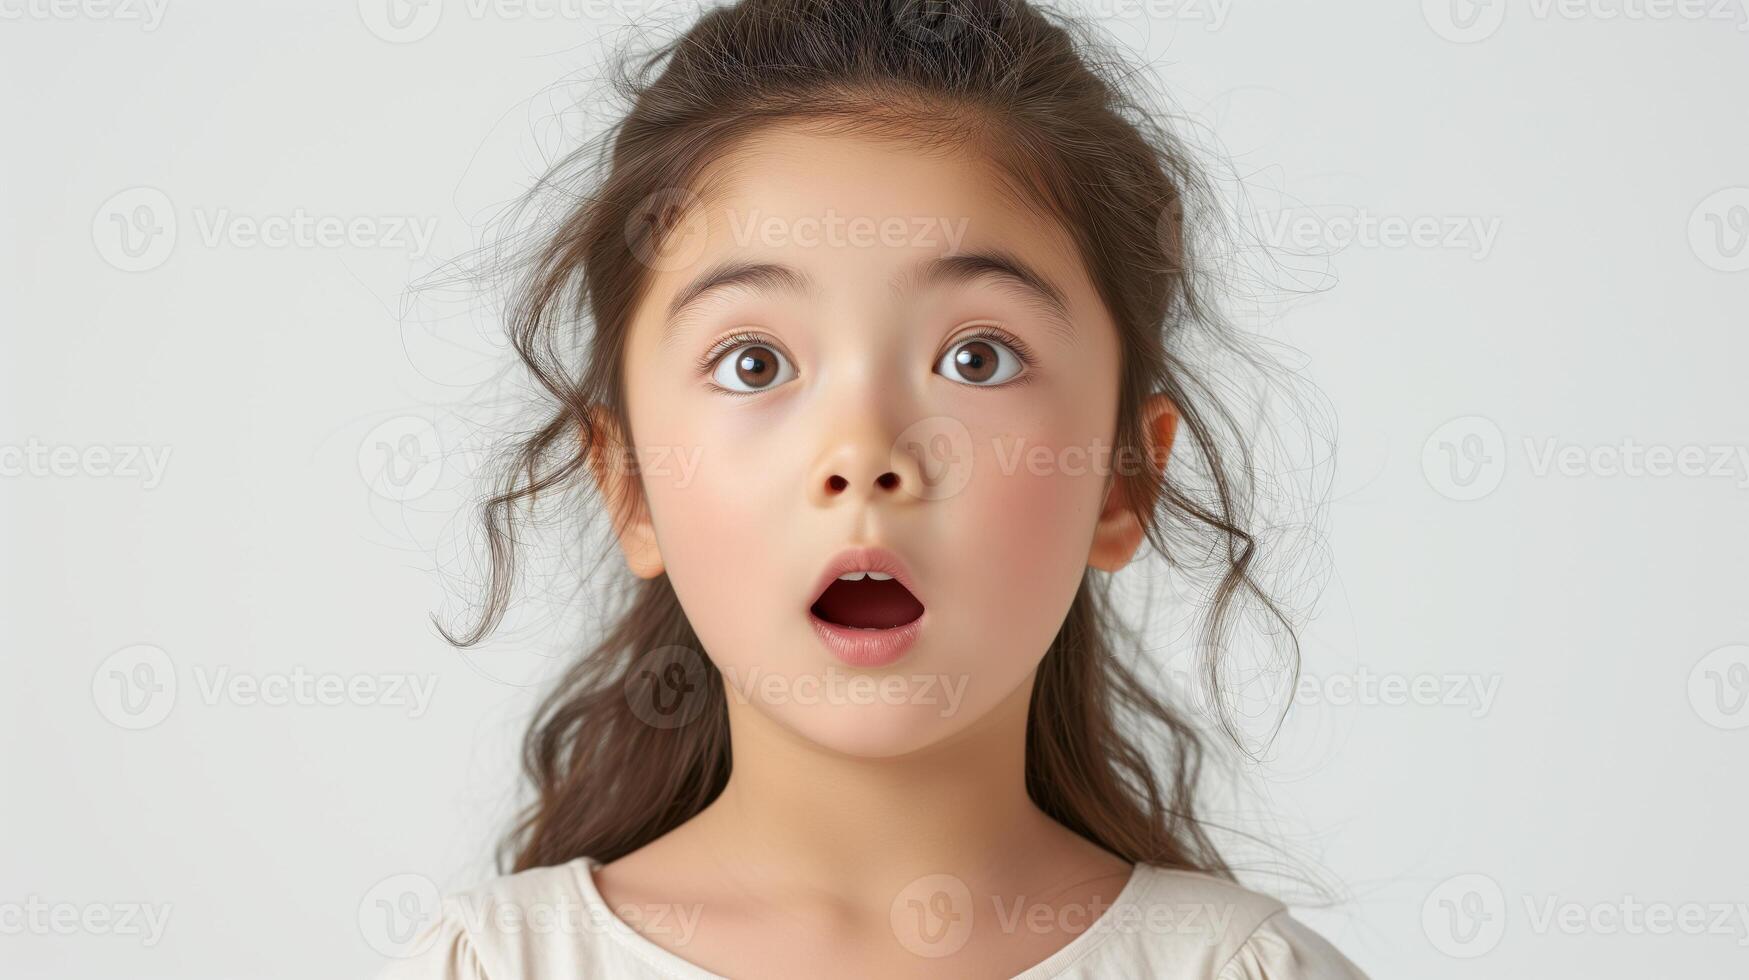 AI generated Portrait surprise face, Portrait of an amazed girl with an open mouth and round big eyes, astonished expression,  Looking camera. White background. photo